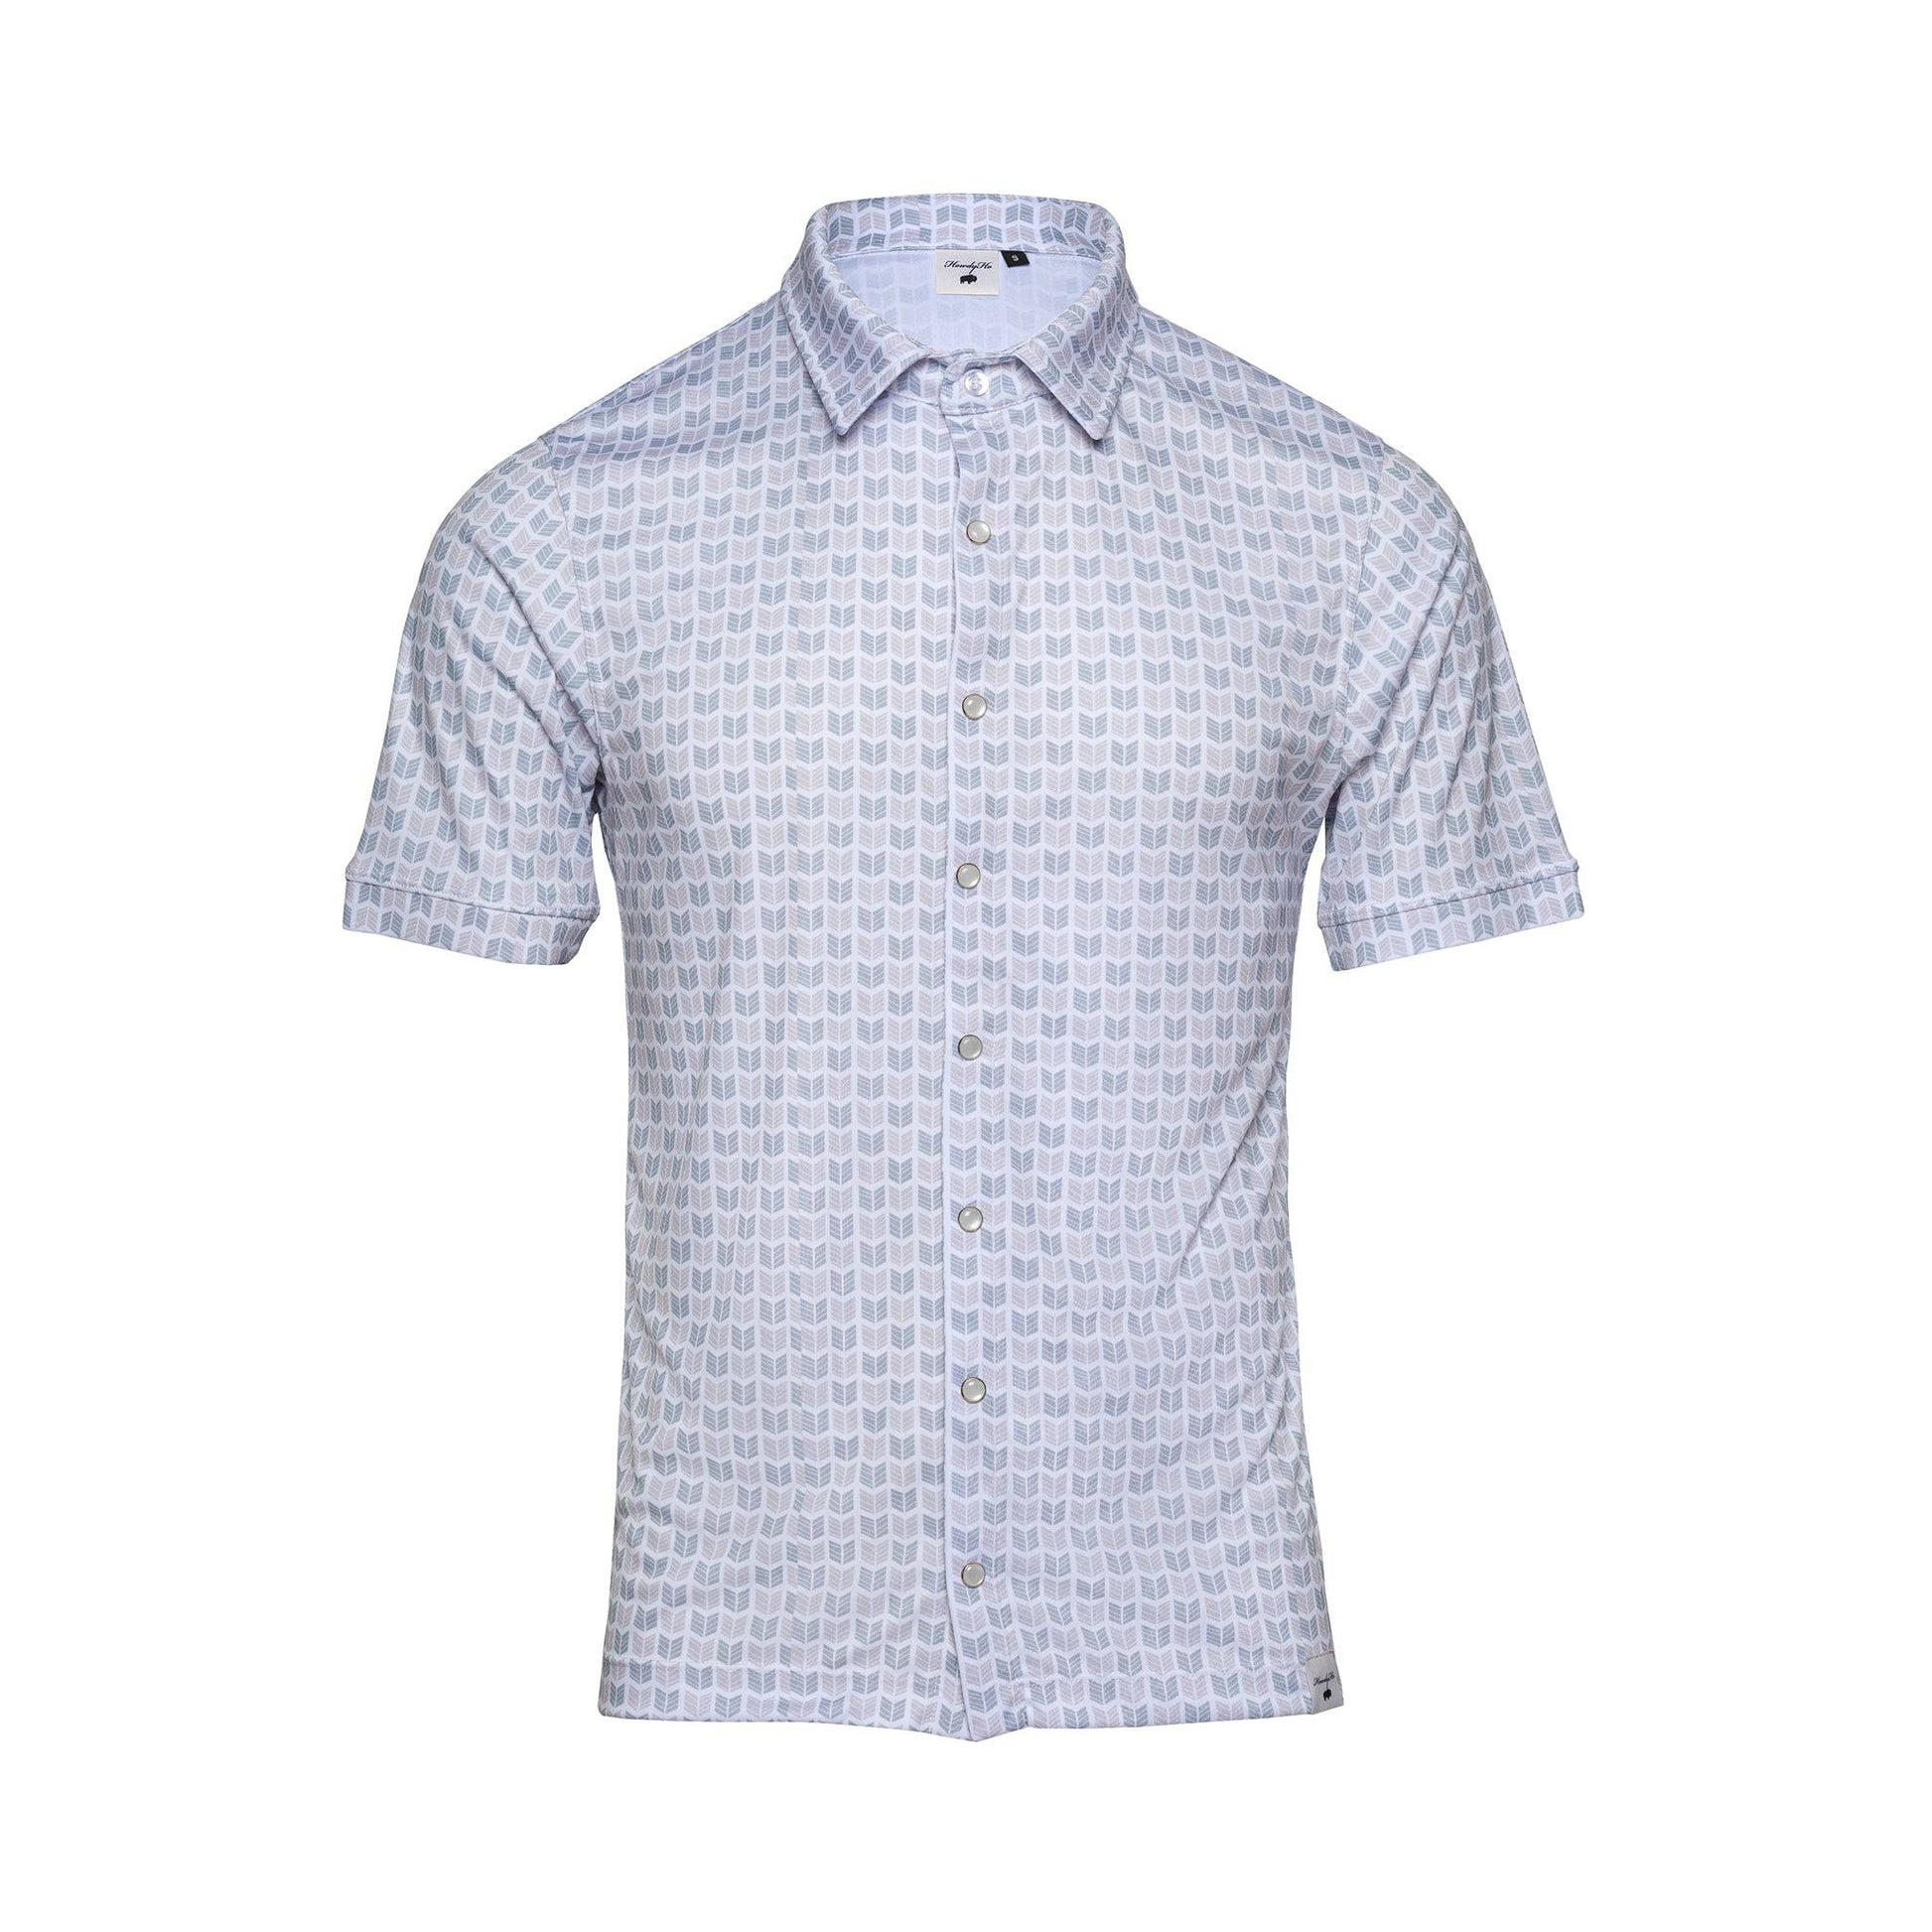 Men's button-down shirt from Howdy-Ho, named 'Arctic Sky Arrows.' Features a distinctive pattern of rhythmic arrows in various shades of grey, creating a serene and modern twist on traditional Western design. Tailored for a blend of sharp style and comfort, ideal for the fashion-conscious man.